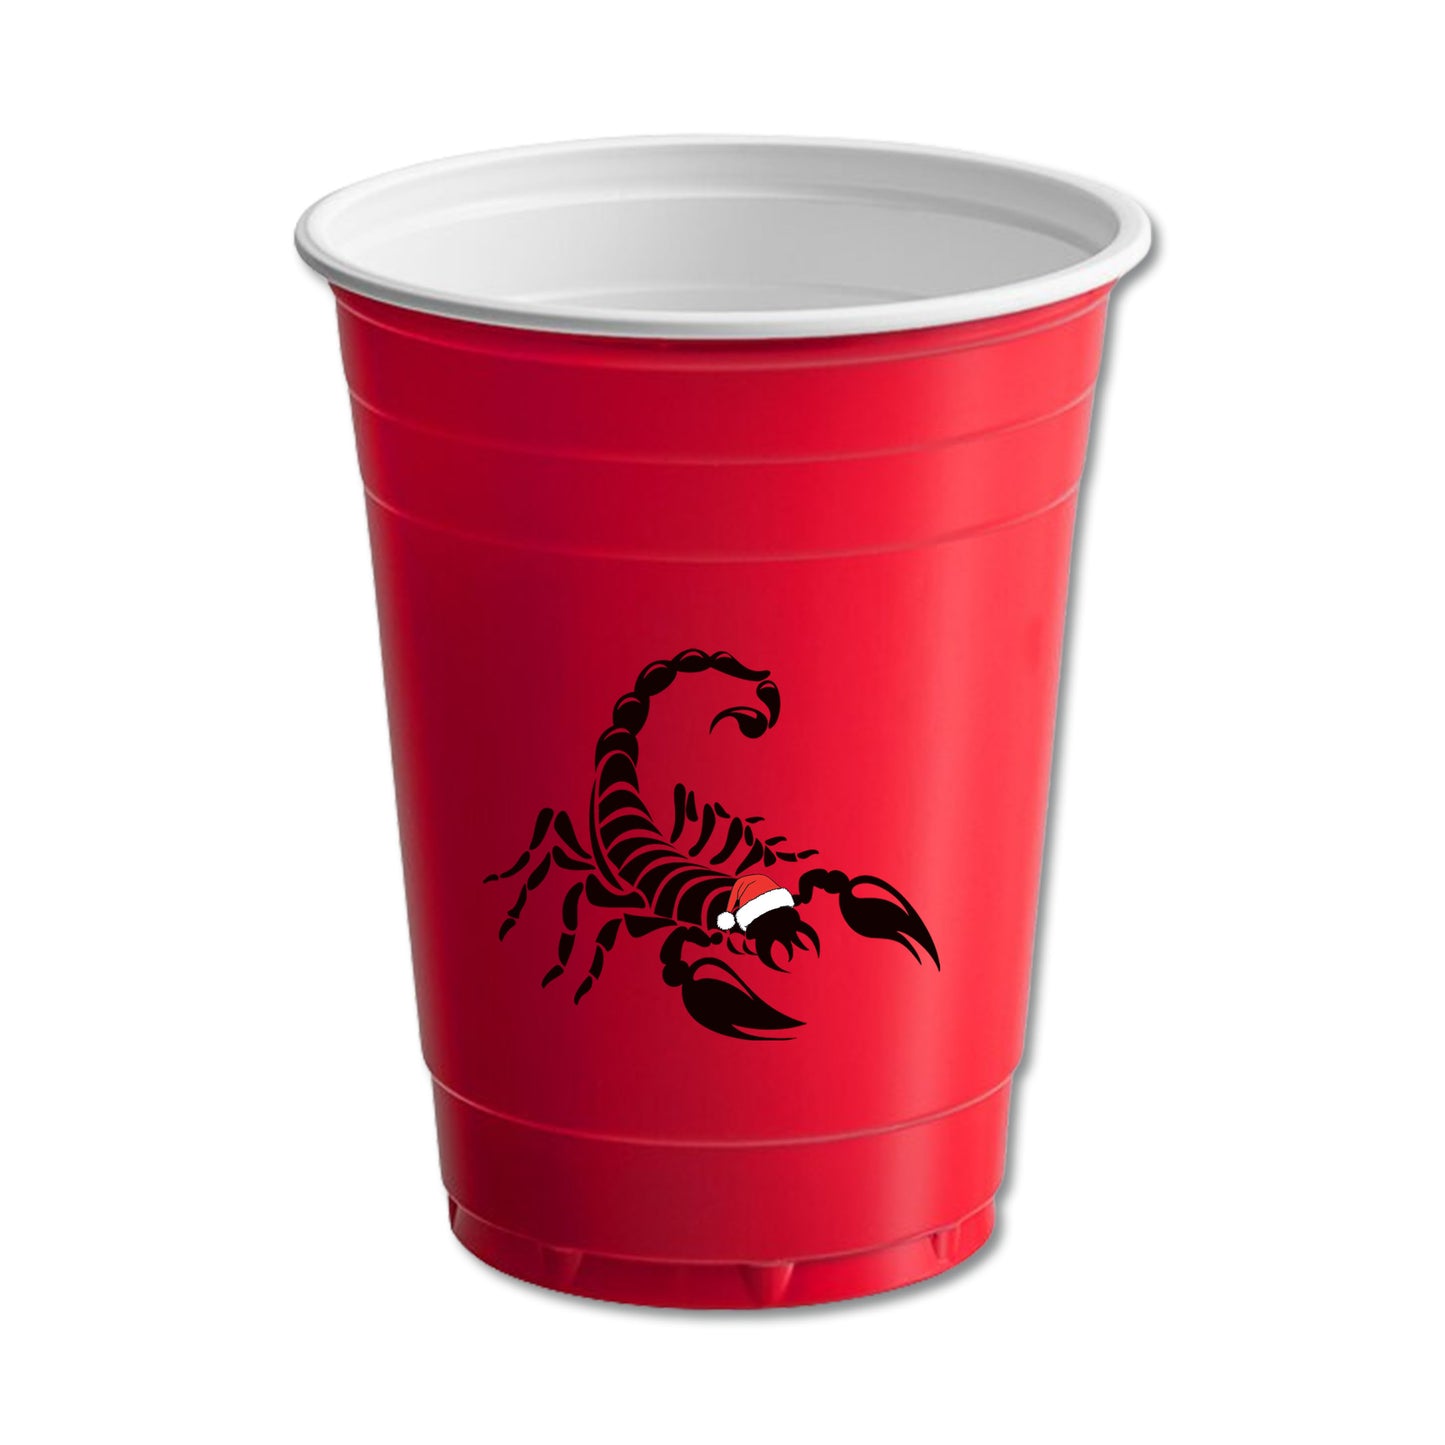 The Akademy Christmas Red Solo Cup (Set of 10)